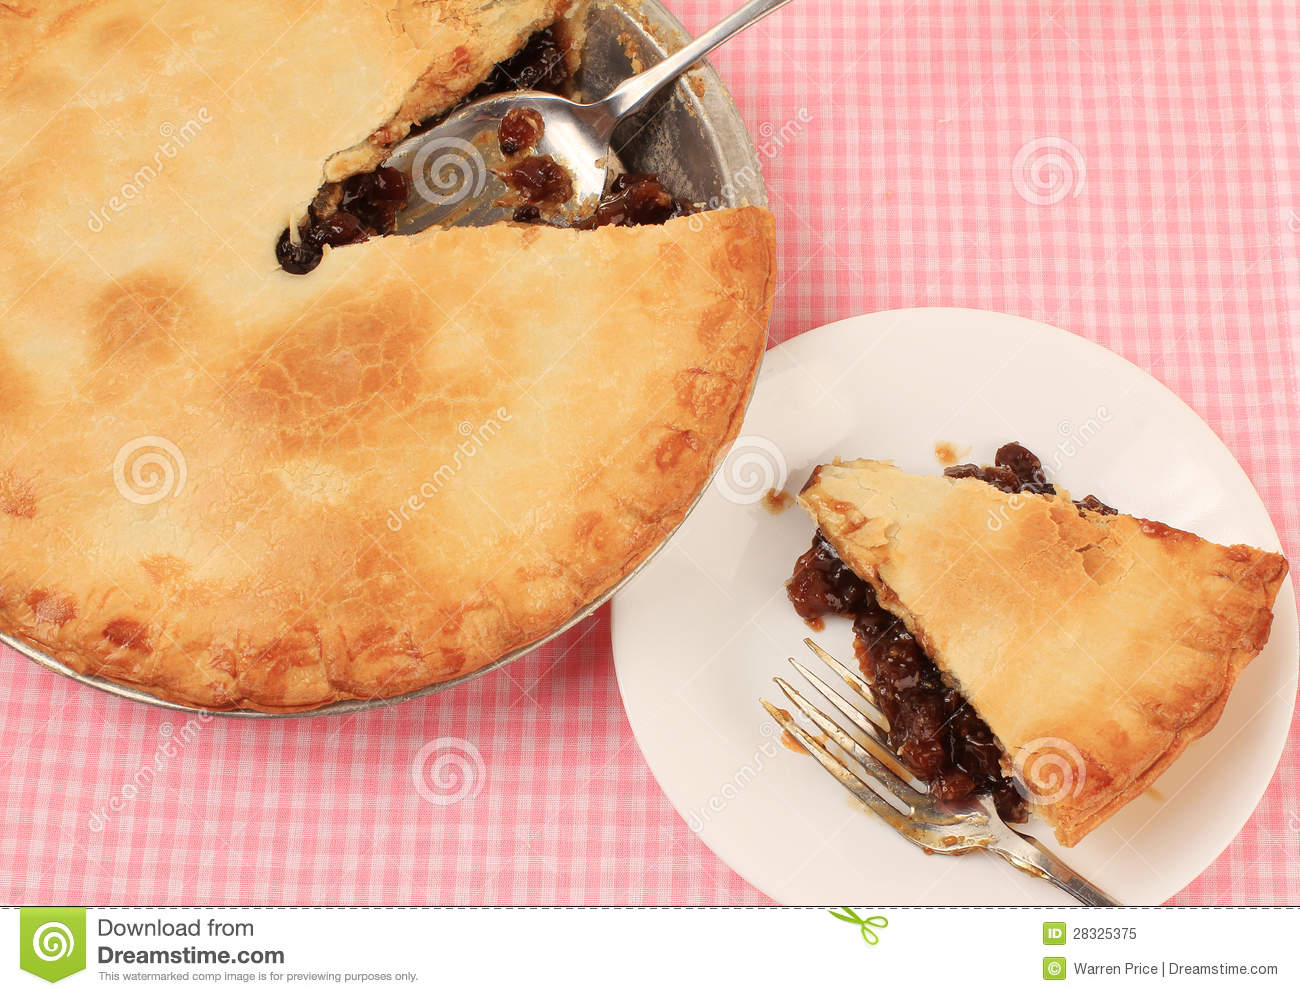 Mincemeat Pie With Slice On Plate Beside It Against Pink Gingham